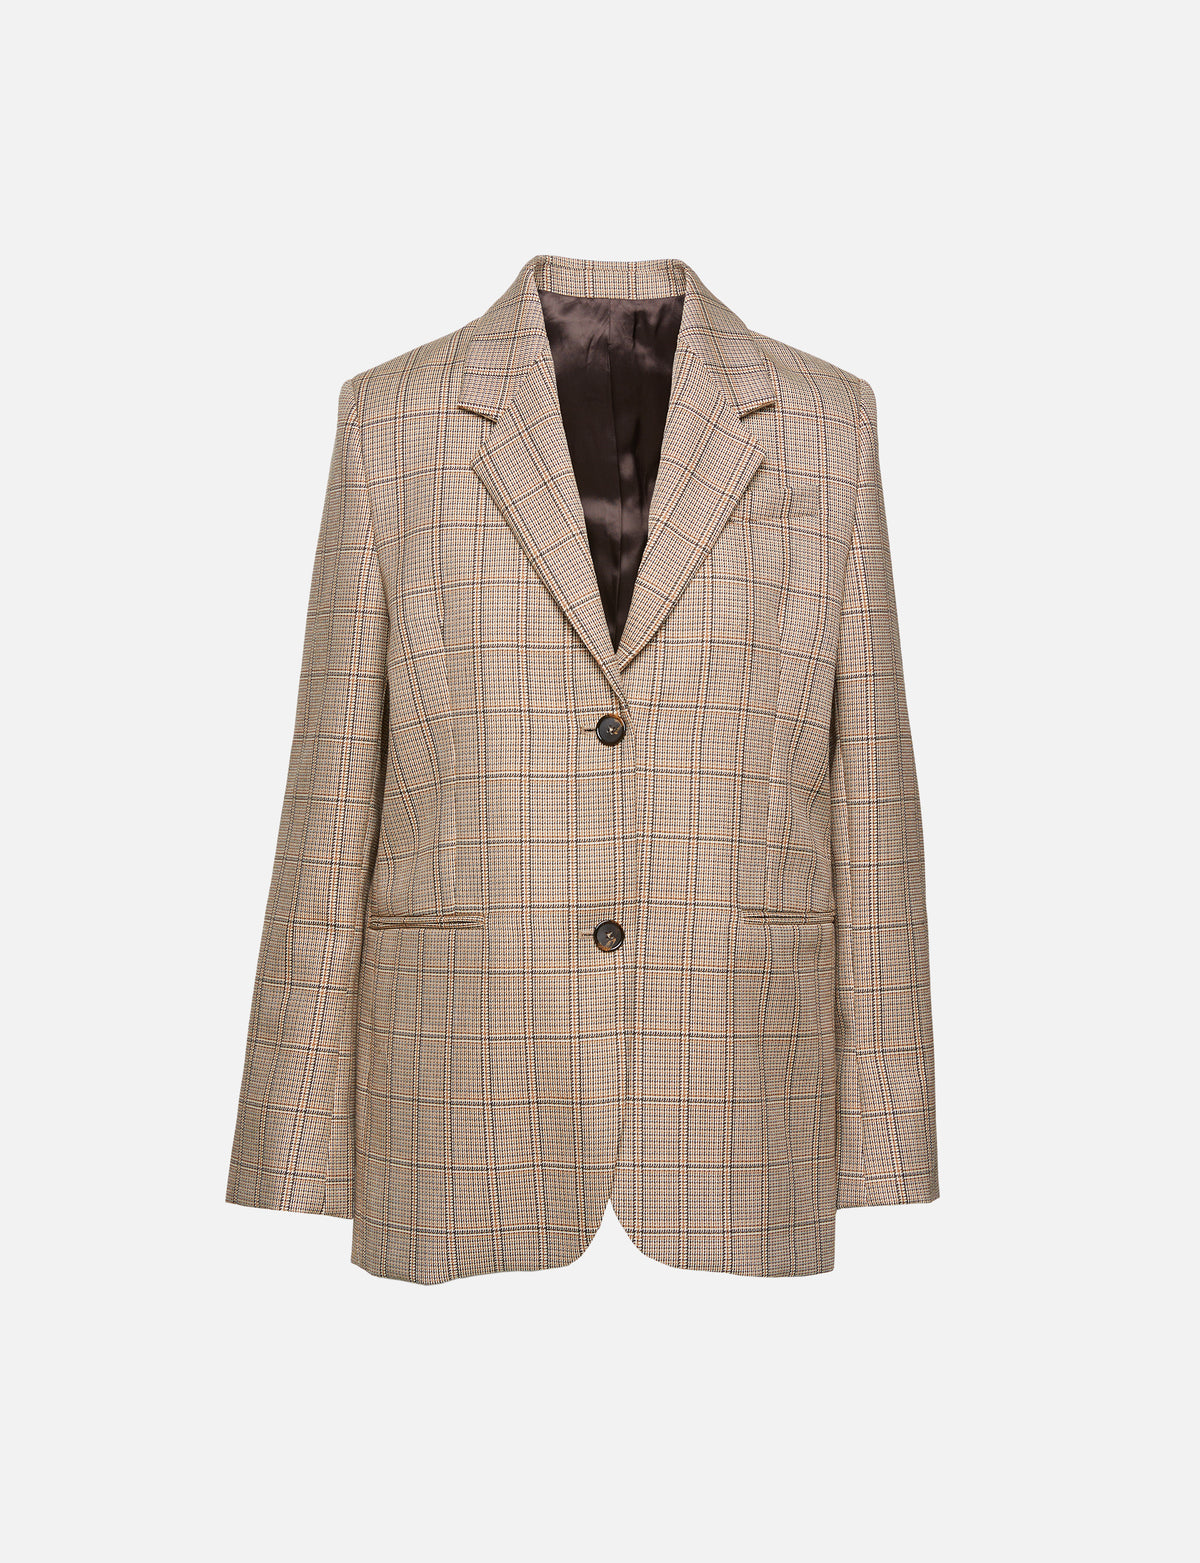 view 1 - Windowpane Check Suit Jacket